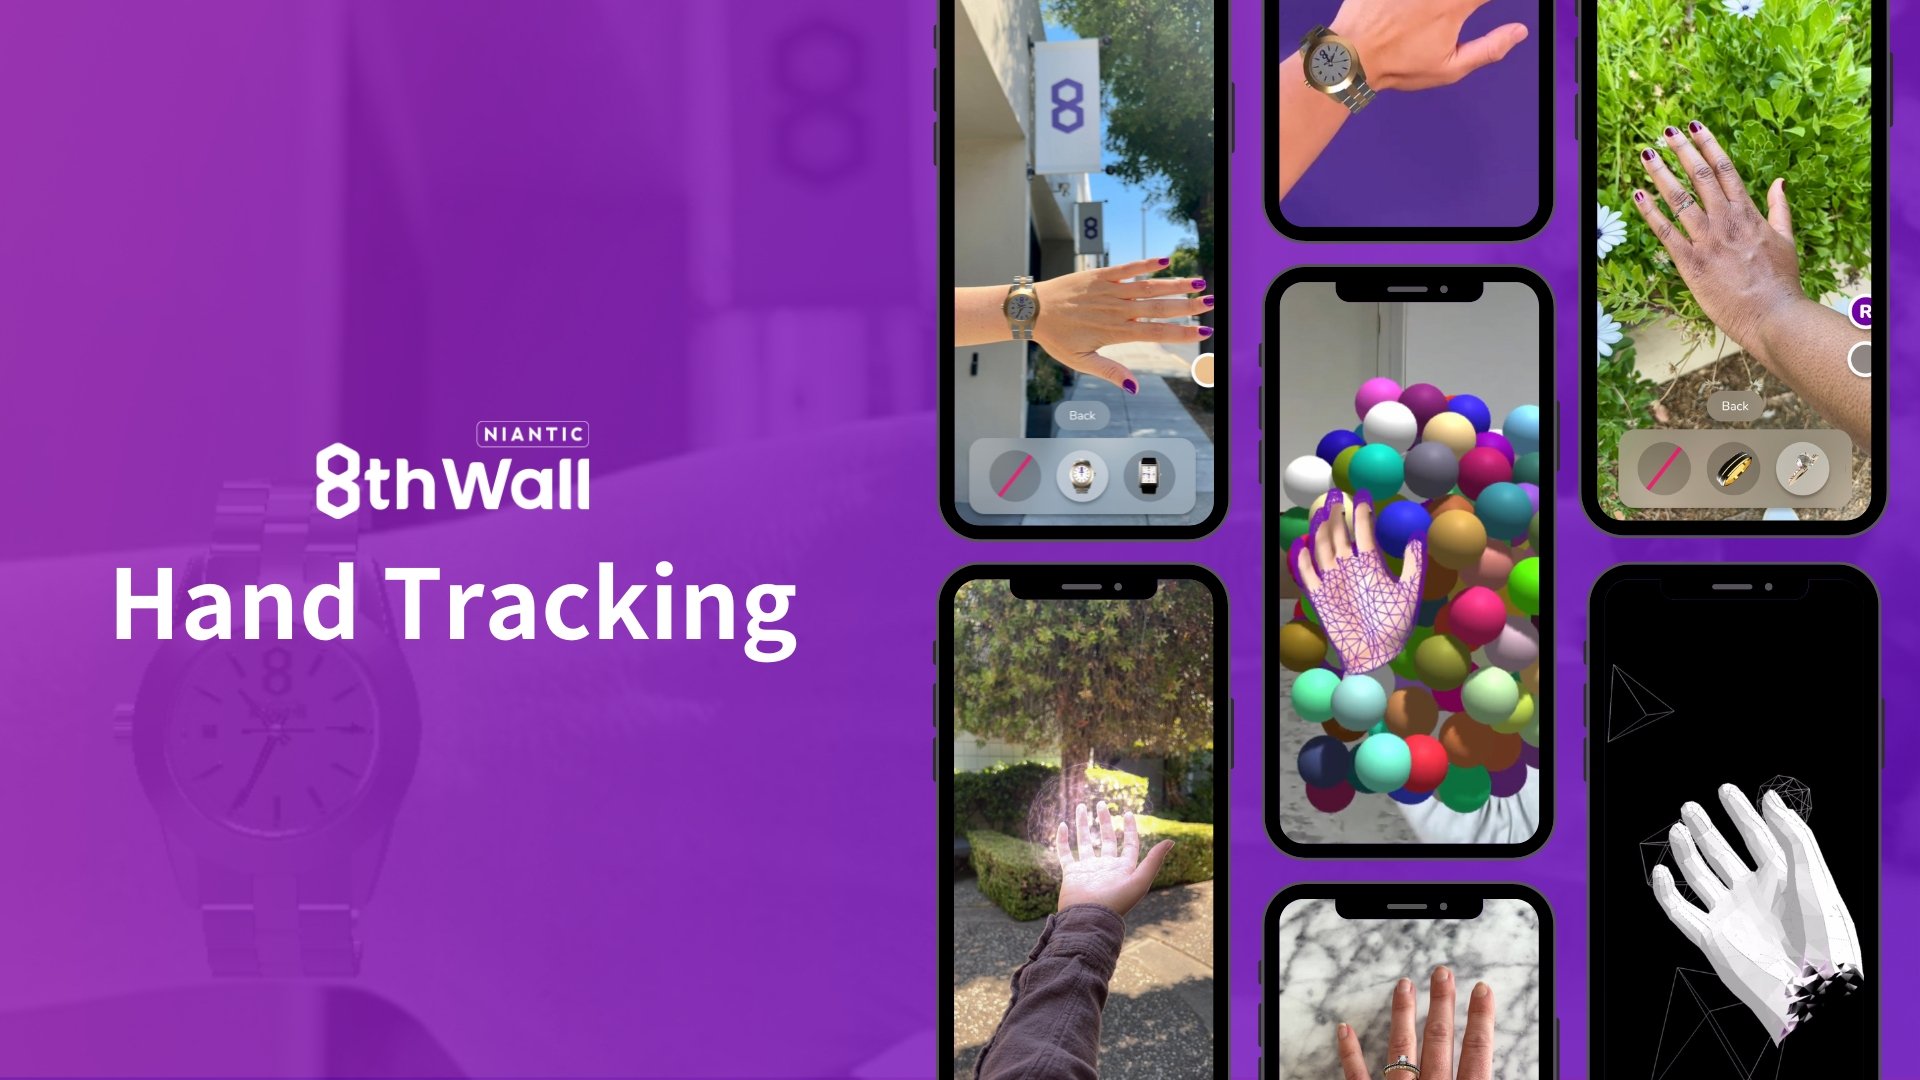 Wave Hello to Hand Tracking